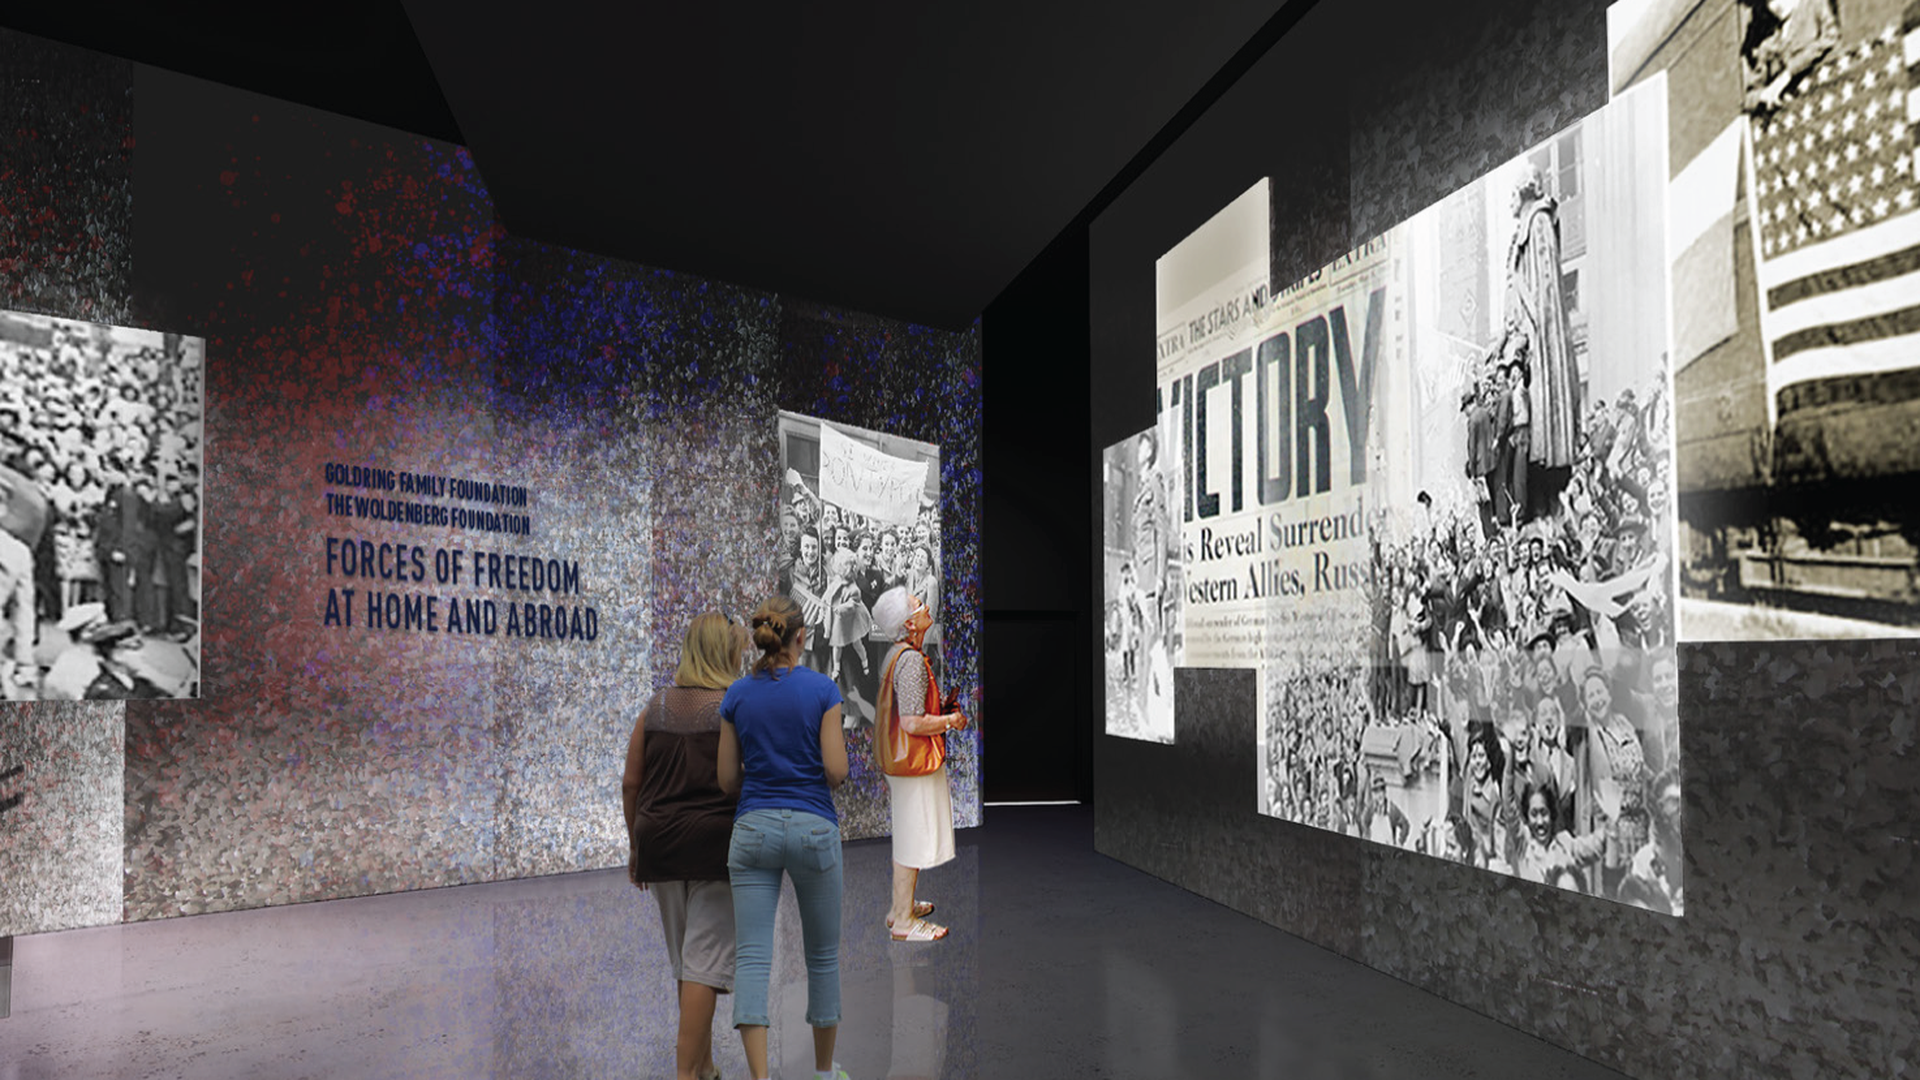 A rendering of a WWII Museum exhibit. In it, three people look up at black and white images displayed on a wall, including a newspaper clipping that reads "Victory."